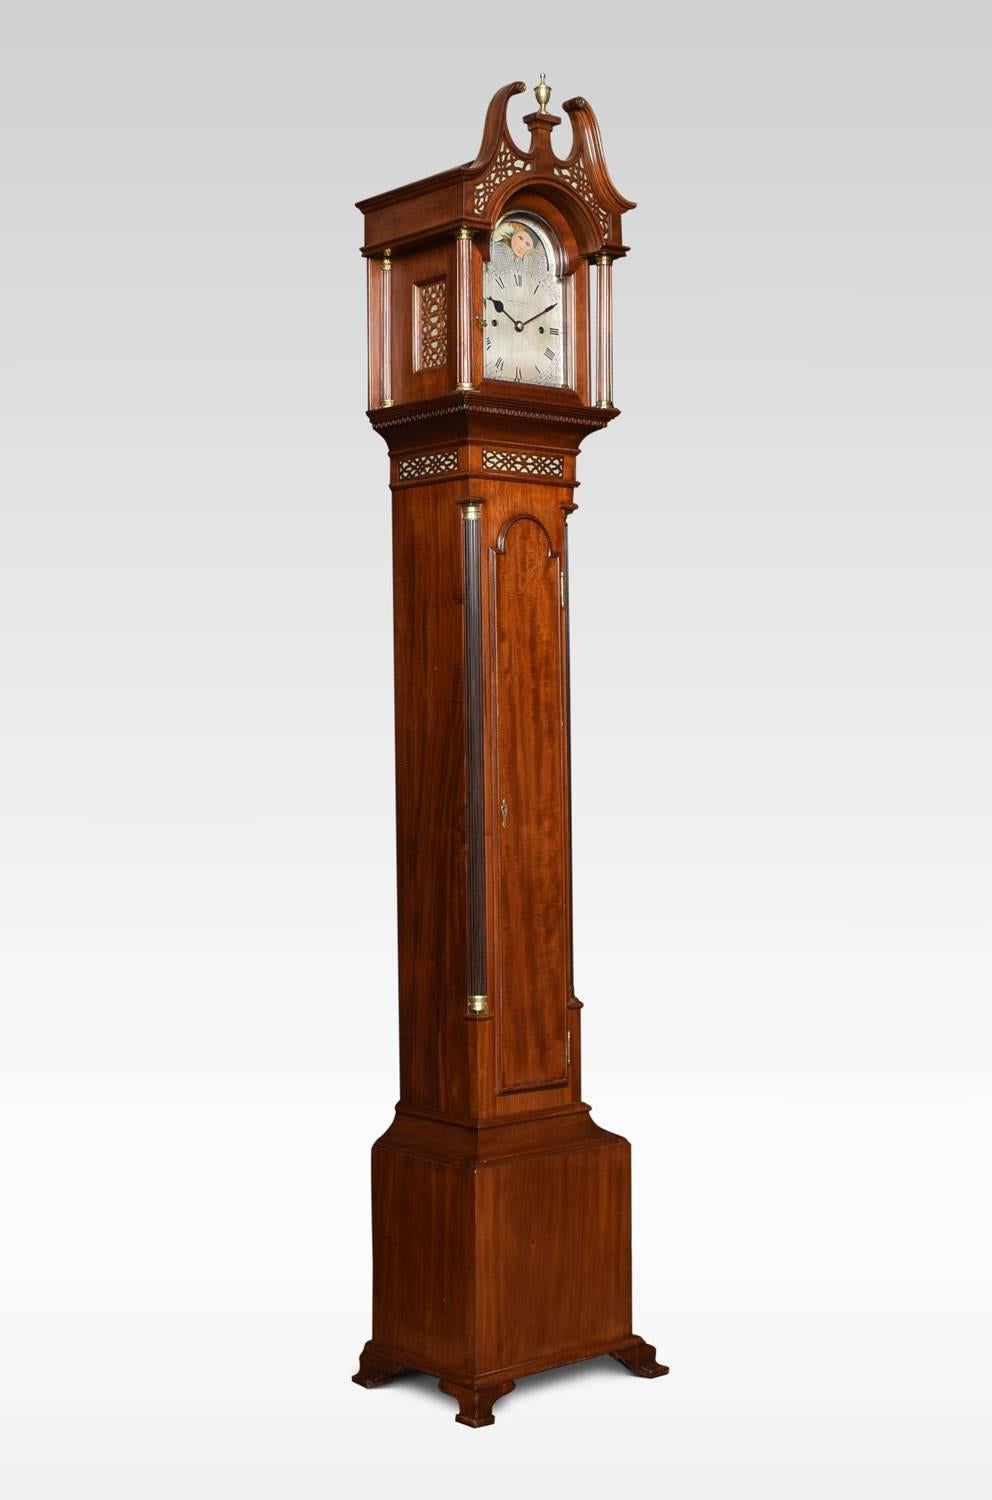 Mahogany cased grandmother clock by Hampton & Son Pall Mall, London, the eight day movement with anchor escapement and rack striking on a coiled gong. The painted rolling moon arch above the dial with foliate scrolls and Roman numerals. The hood